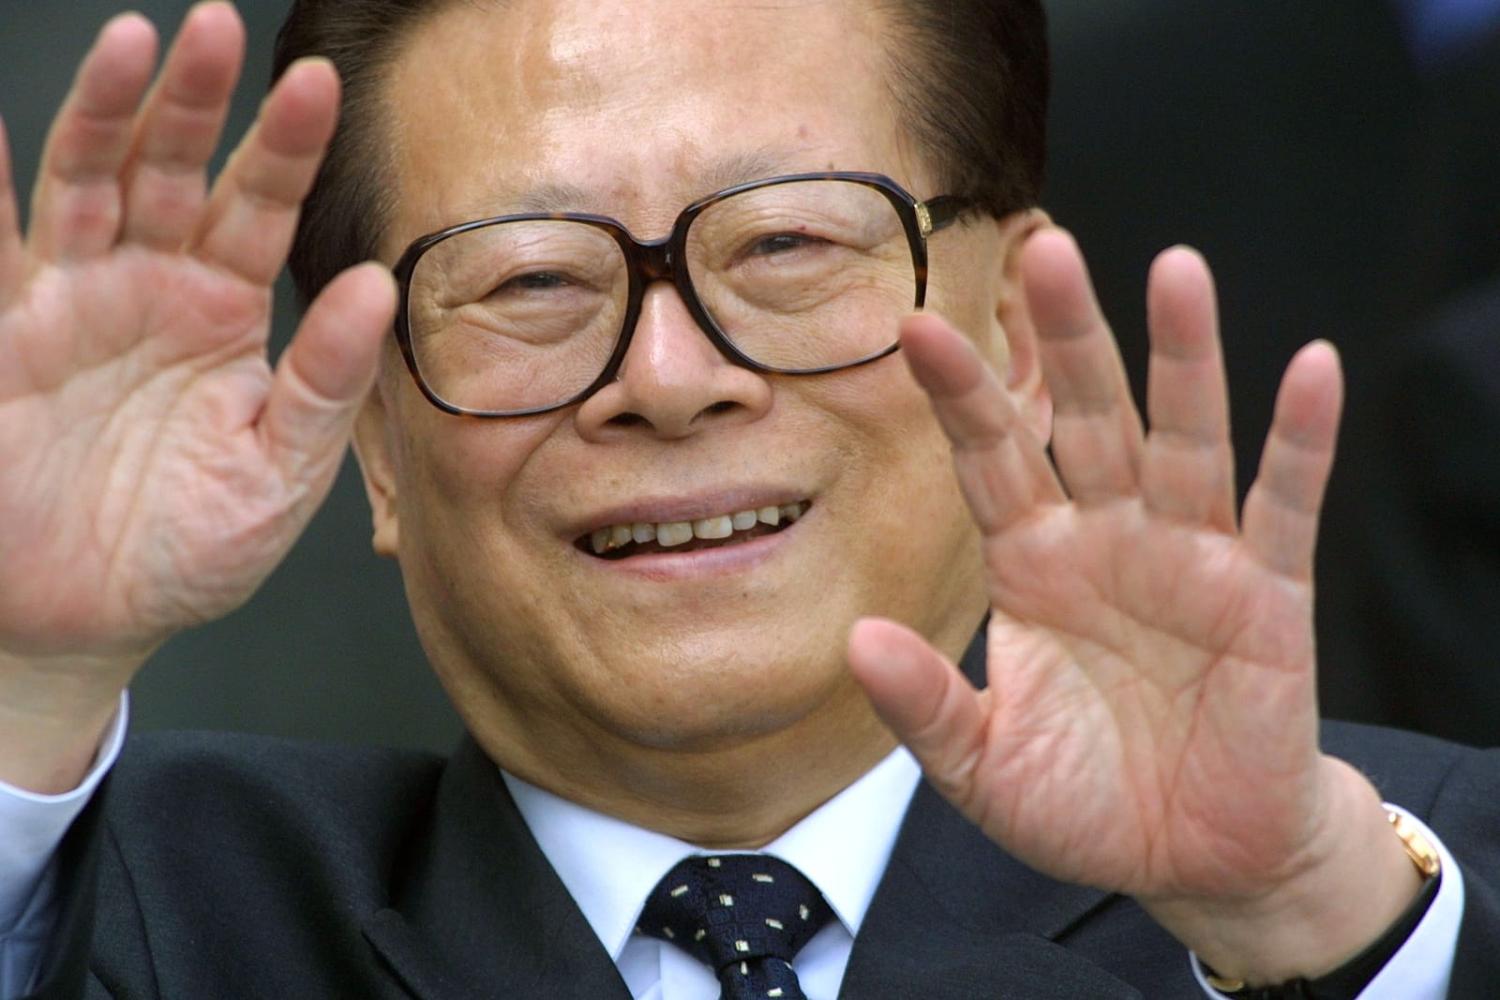 No closet liberal political reformer, Jiang Zemin, seen here during a 2002 visit to Germany, nonetheless oversaw changes that would have Mao turning in his grave (Sean Gallup/Getty Images)